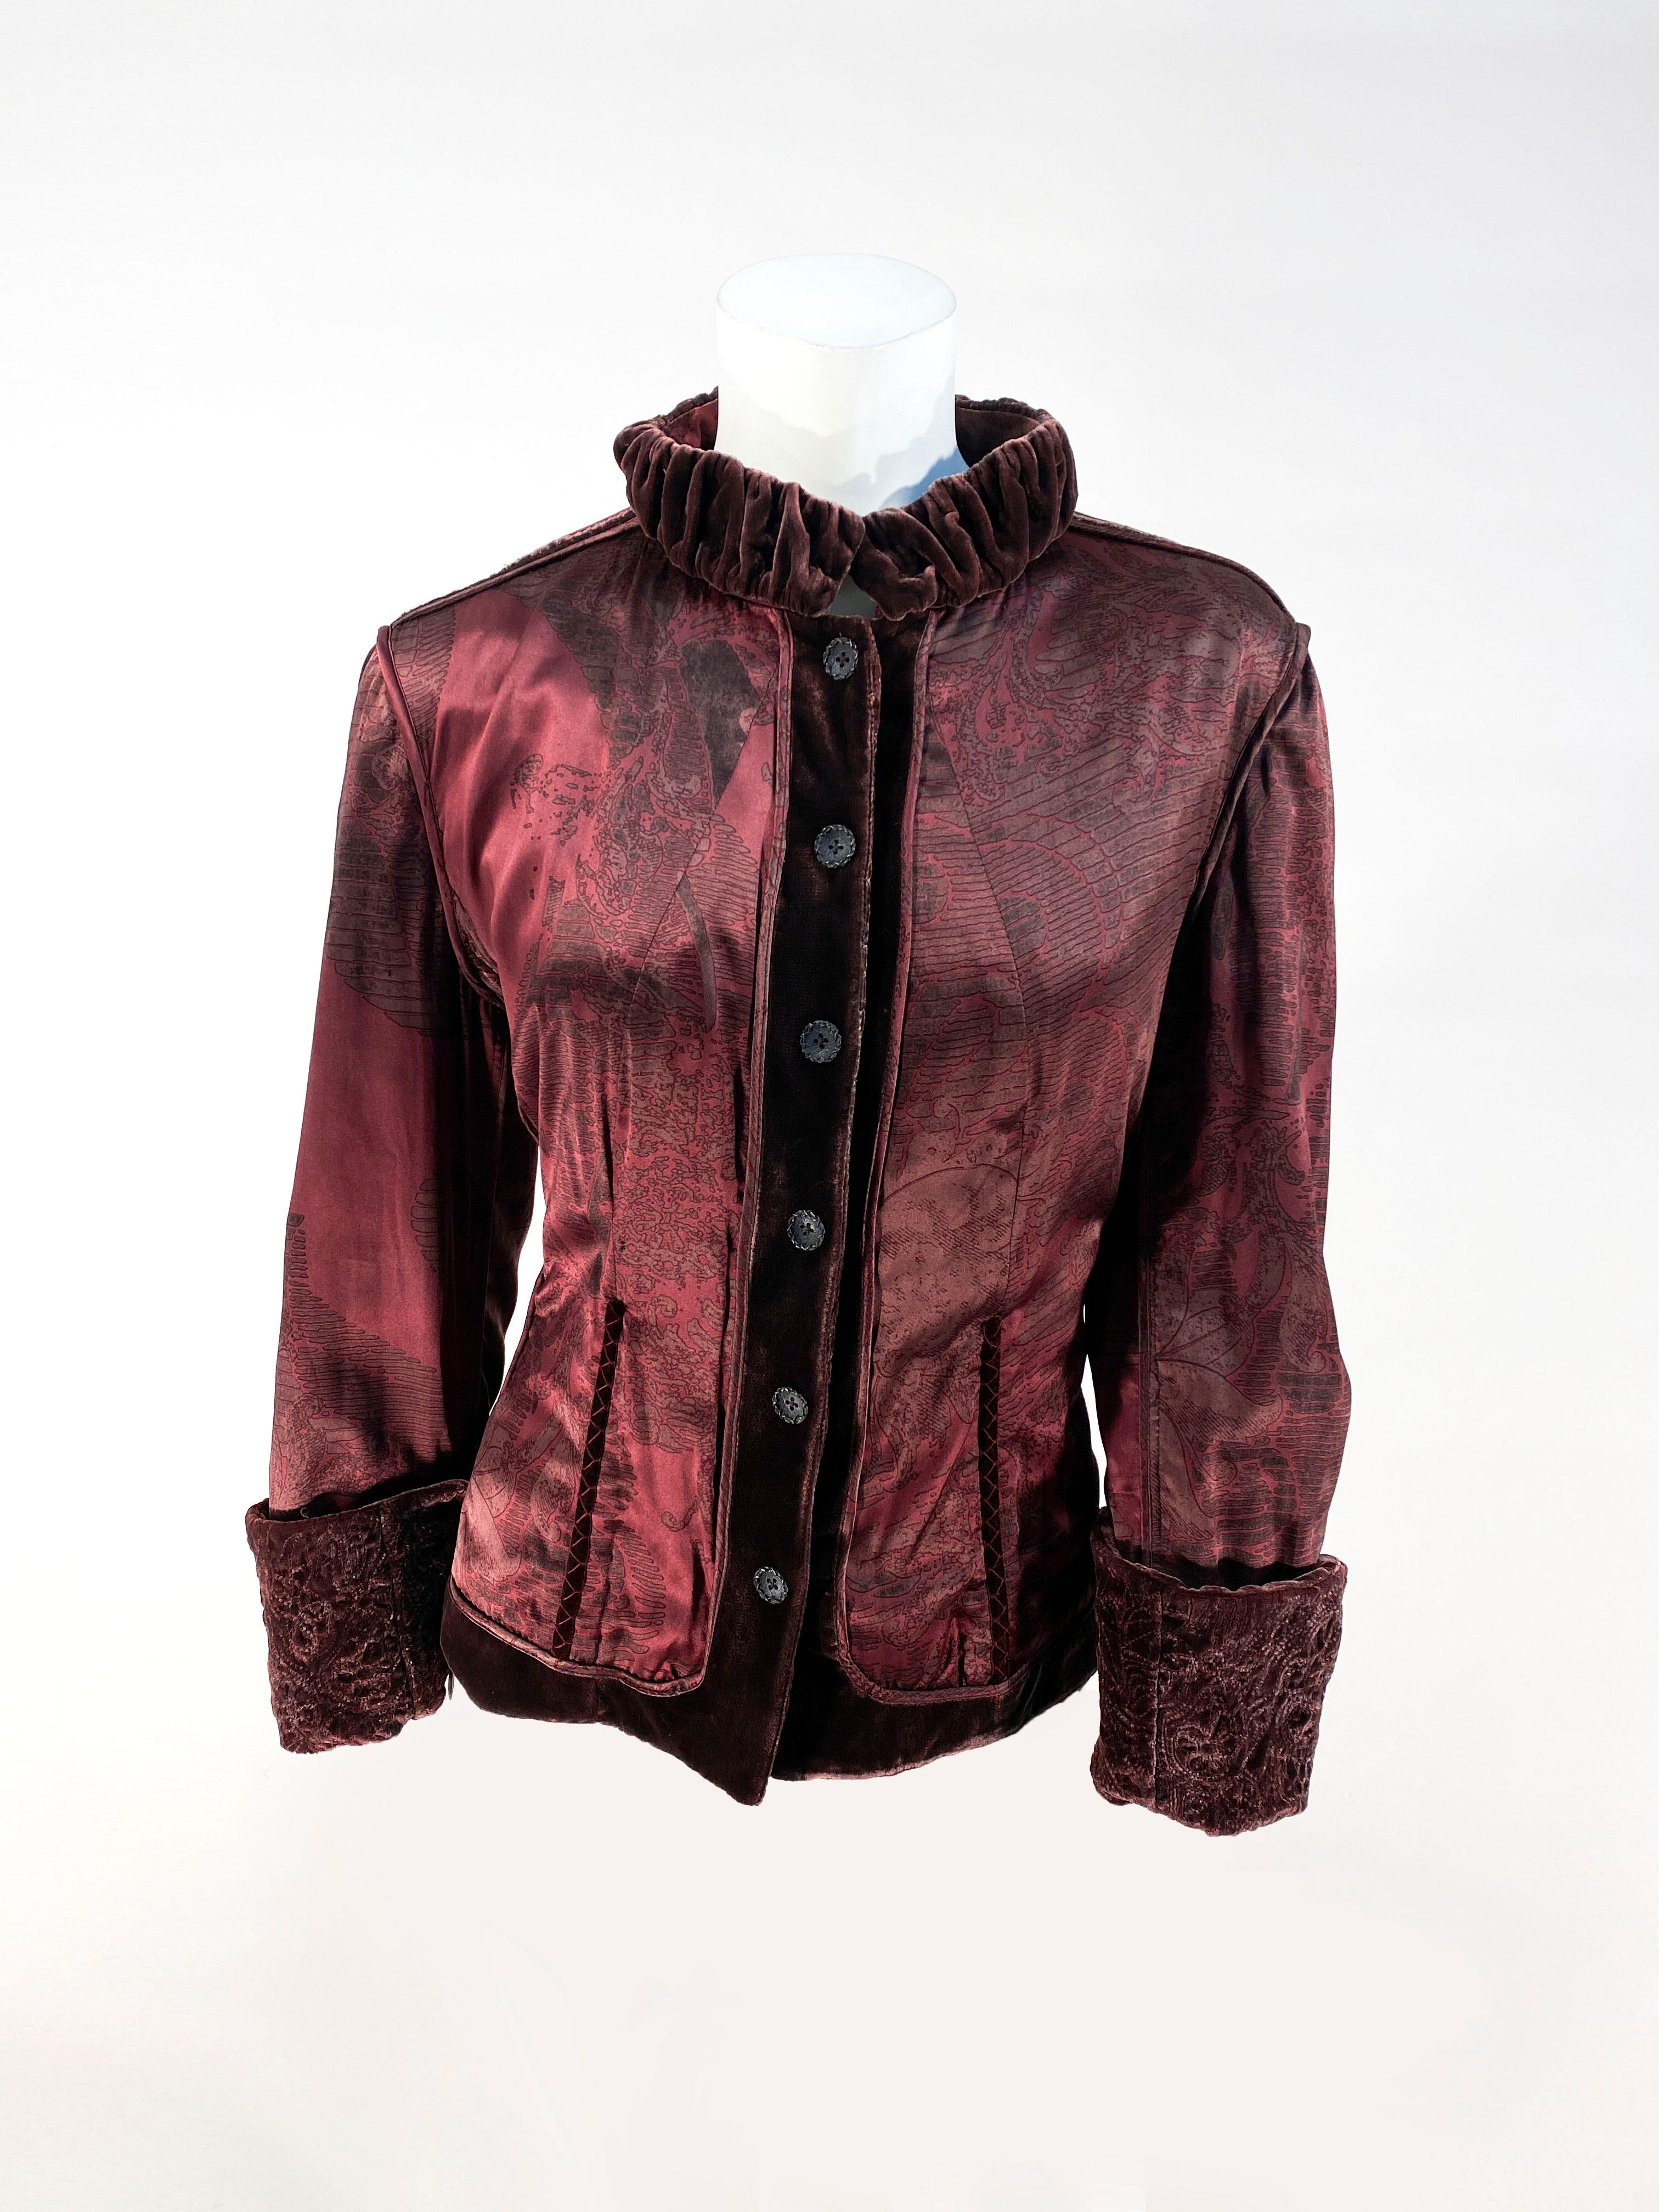 1990s maroon reversible jacket with cocoa brown velvet, patch pockets, decorative buttons, and silk covered snaps. On the reversible side, is a paisley printed silk shell with ruched collar, and velvet cuffs. The back is decorated with stays/boning